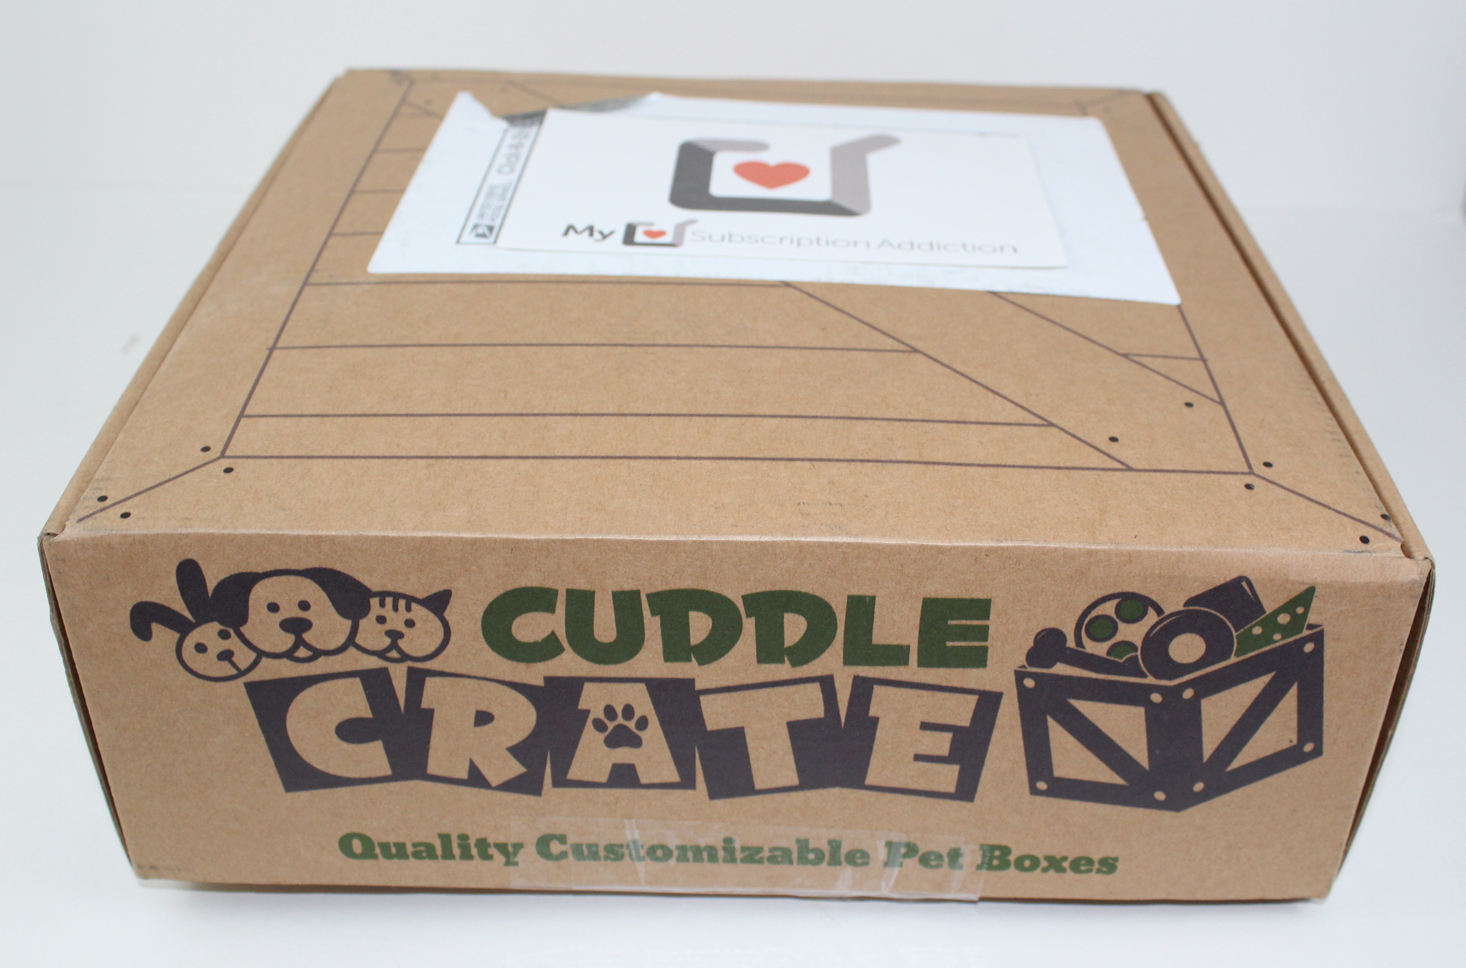 Cuddle Crate Cat Box Review + Coupon – December 2017